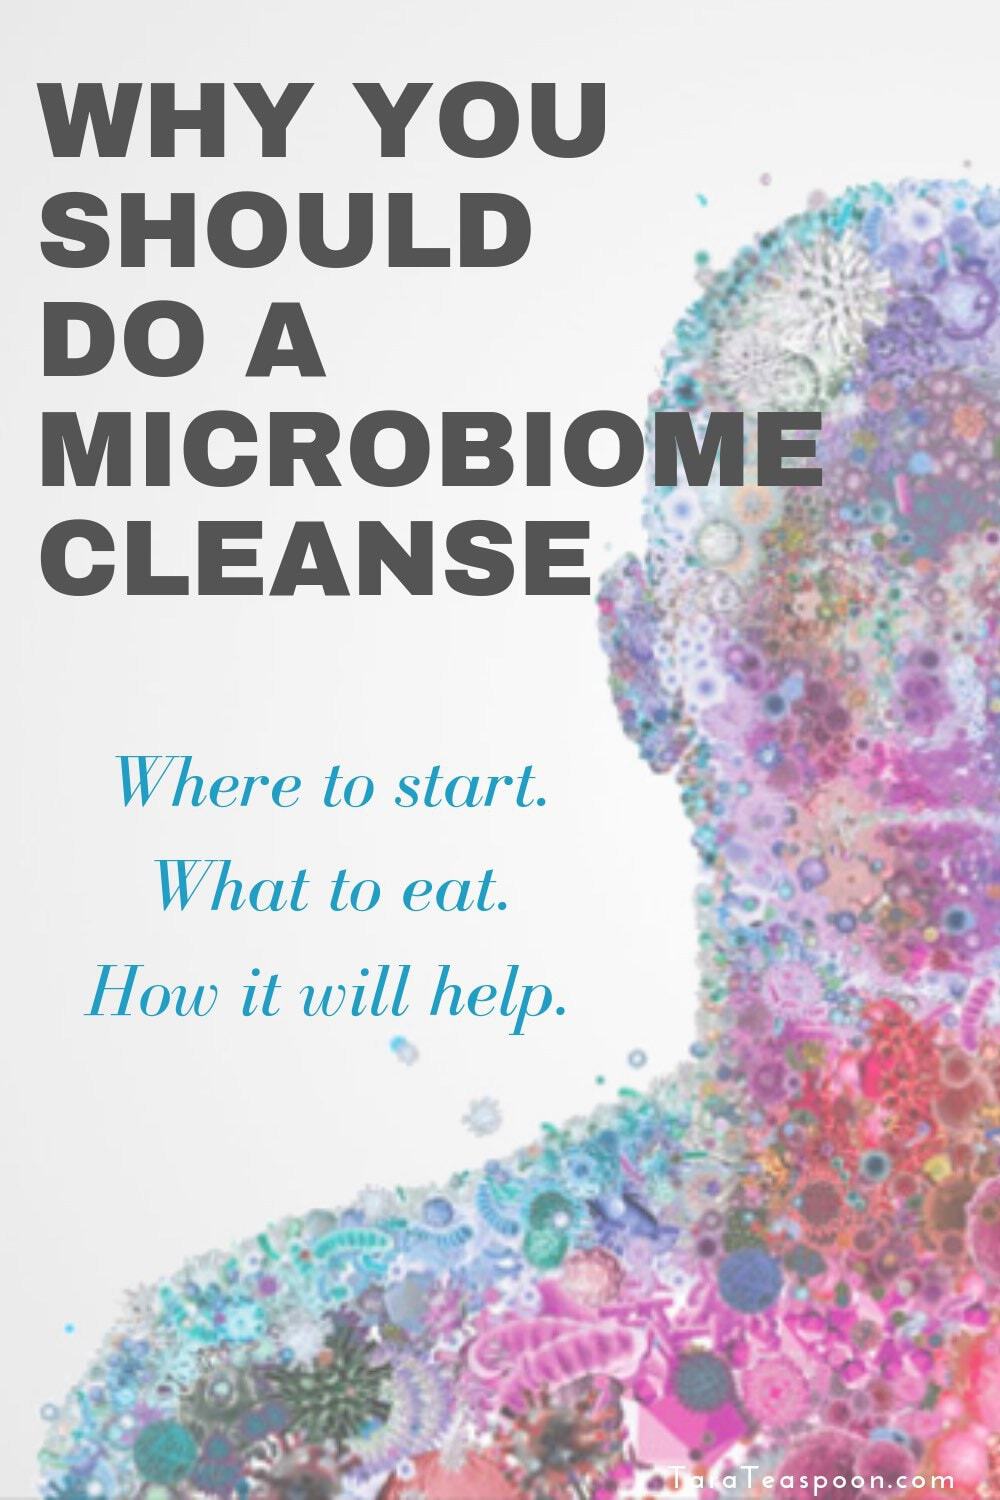 Why you should do a microbiome cleanse